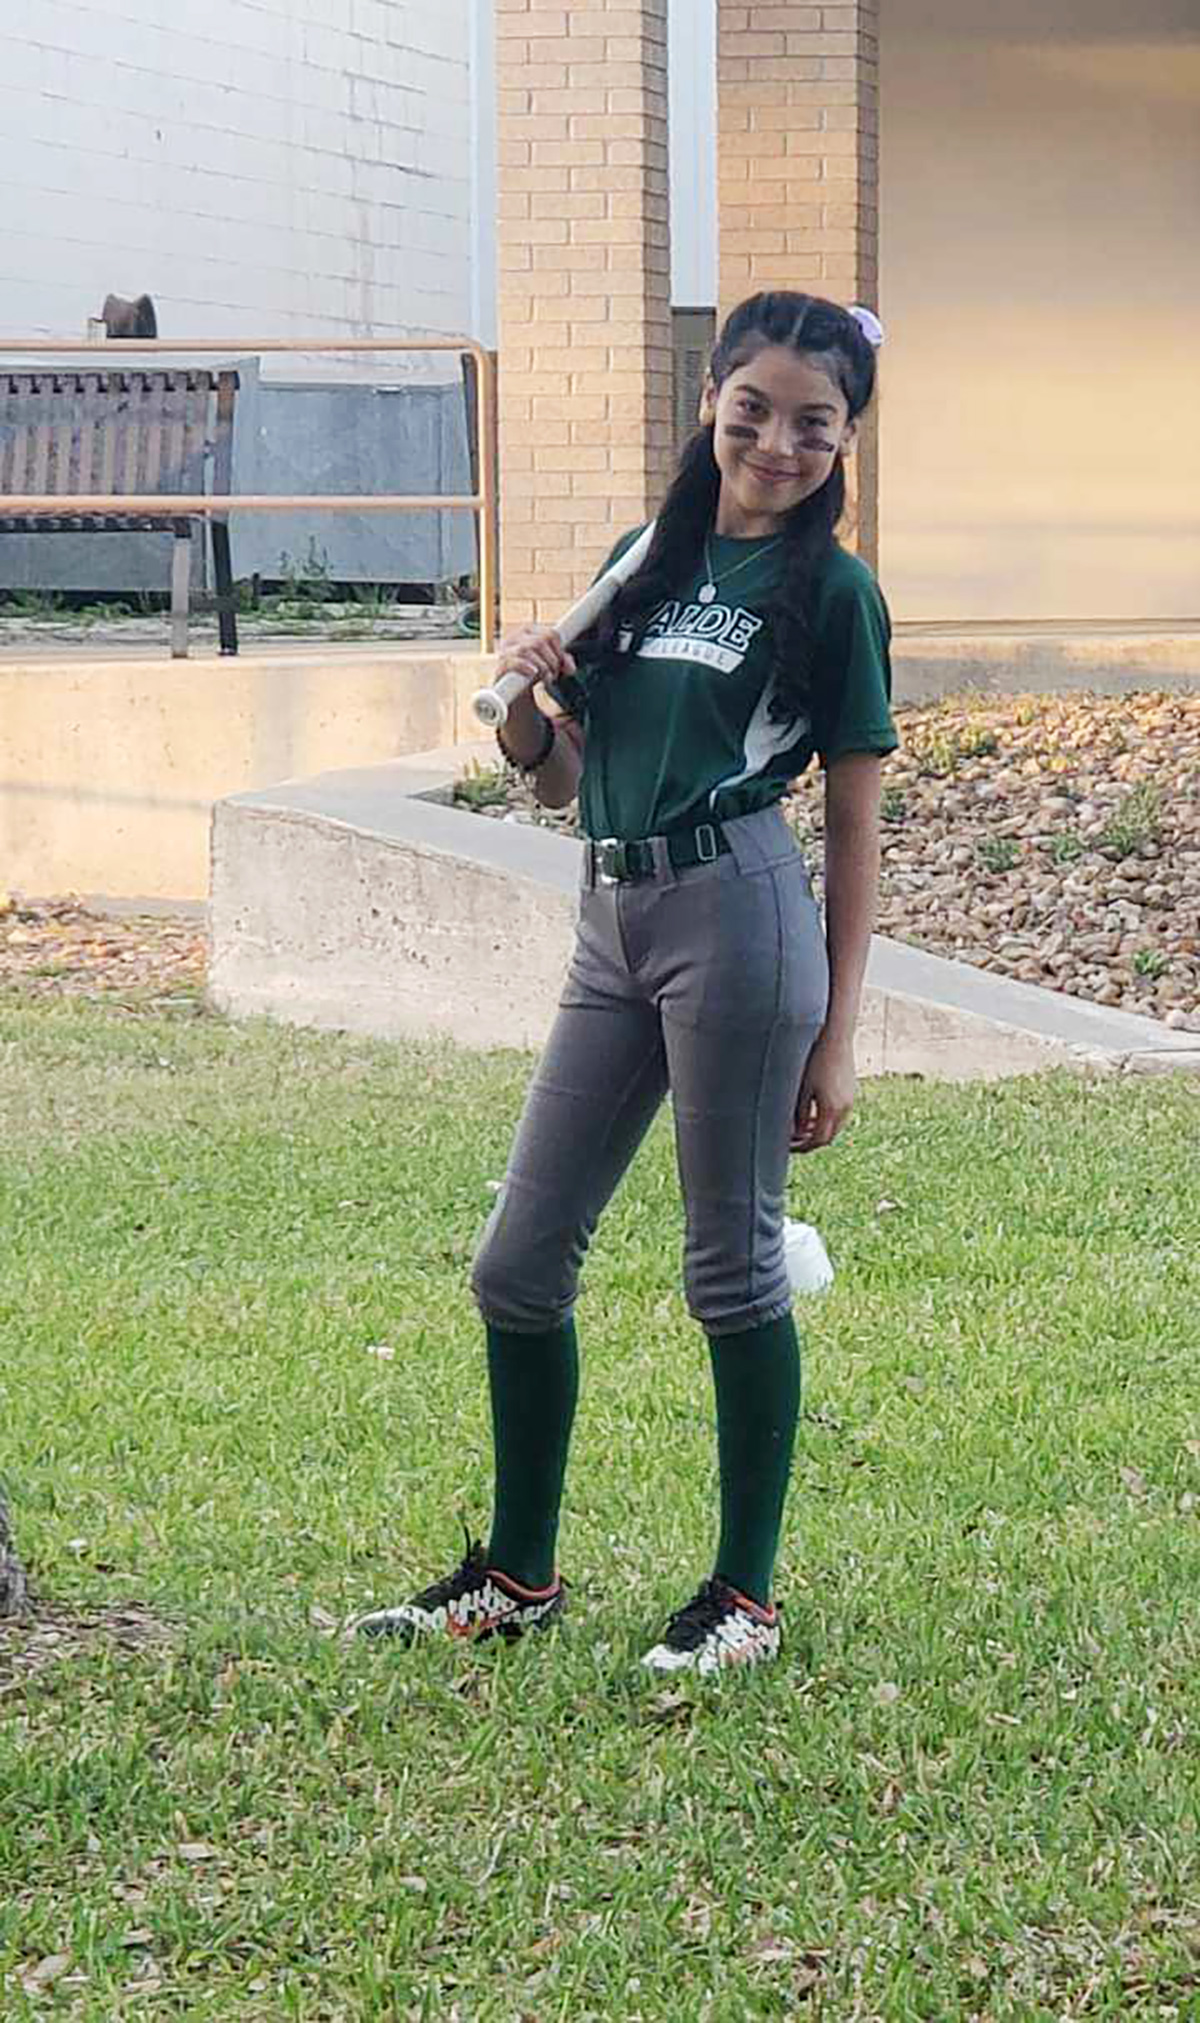 PHOTO: Eliahana Cruz Torres, in an undated family photo. Torres died in the Robb Elementary School shooting on May 24, 2022, in Uvalde, Texas.